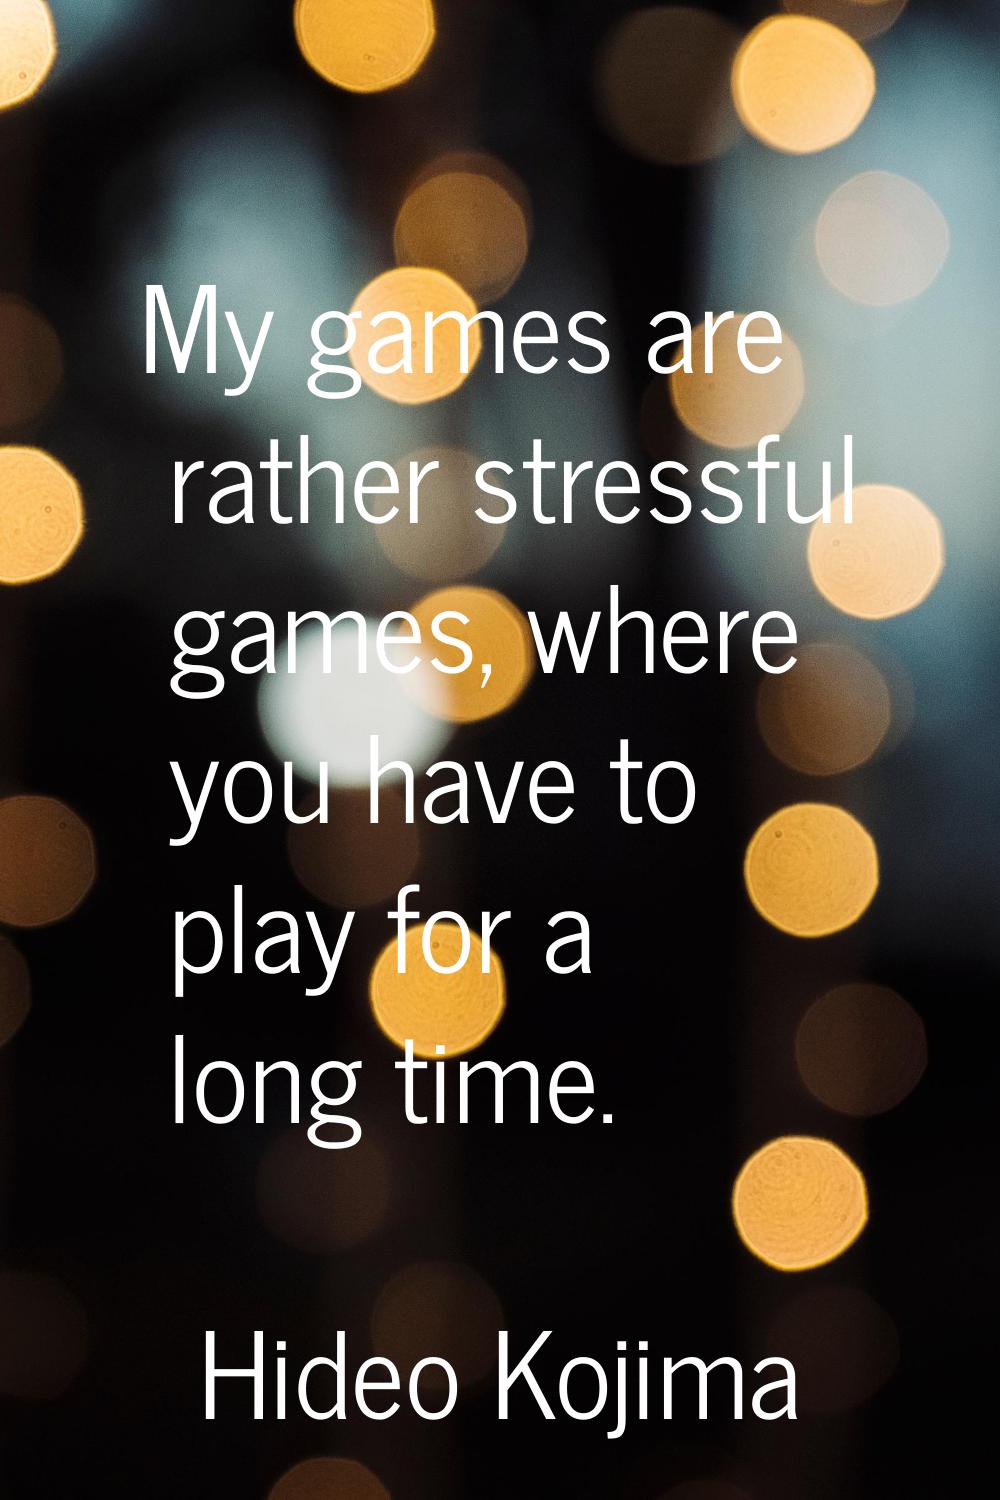 My games are rather stressful games, where you have to play for a long time.